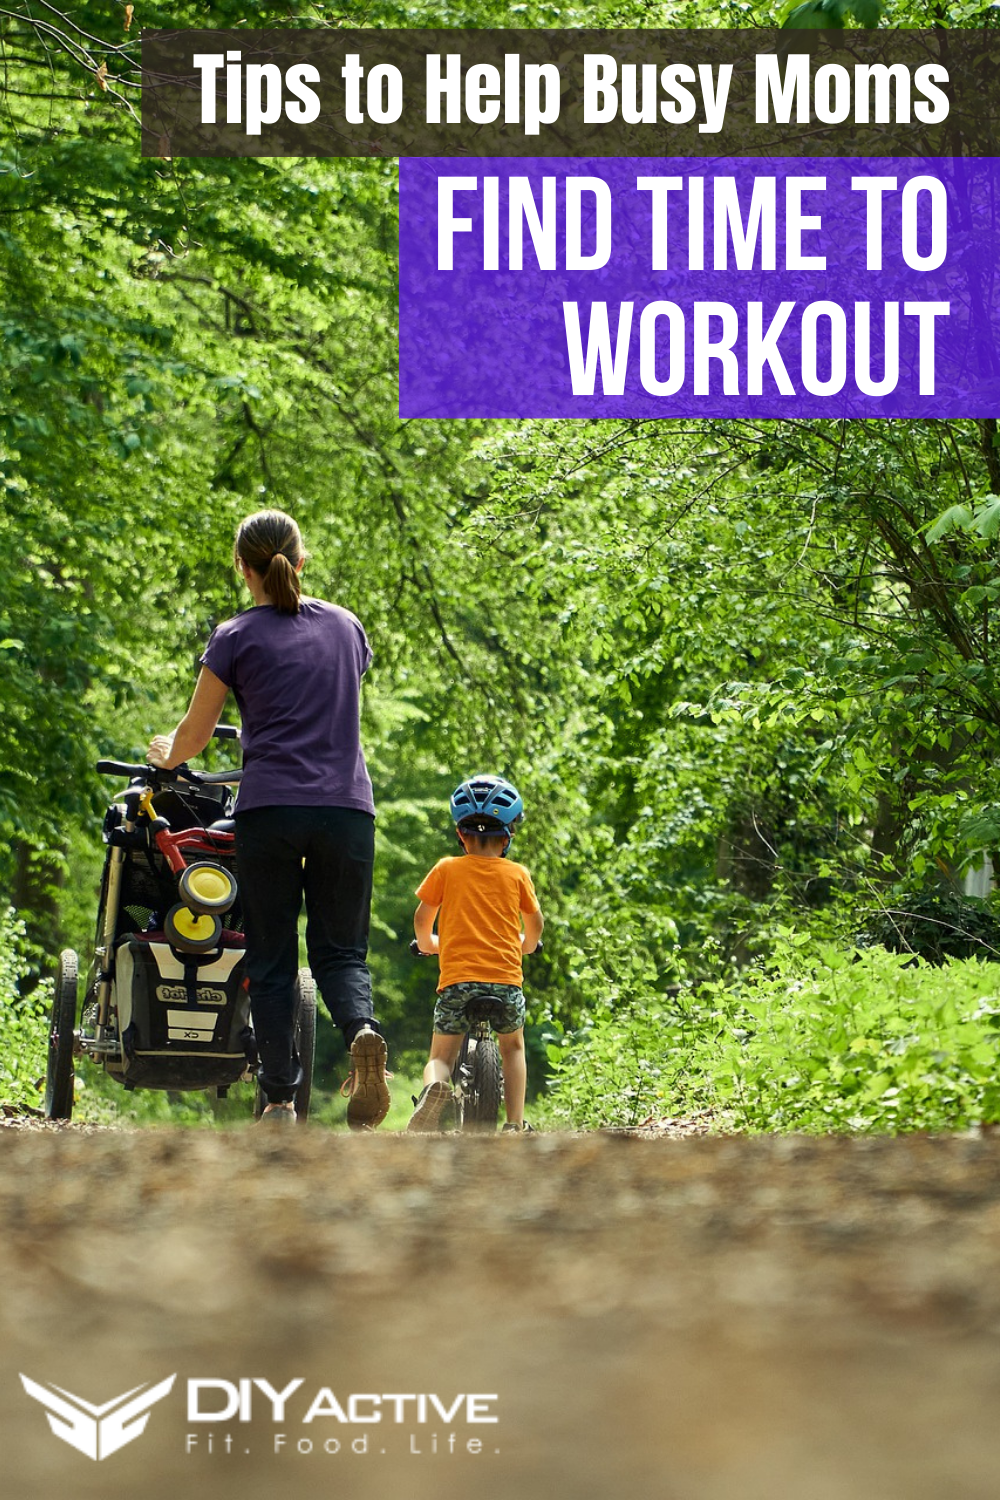 Tips to Help Busy Moms Find Time To Exercise